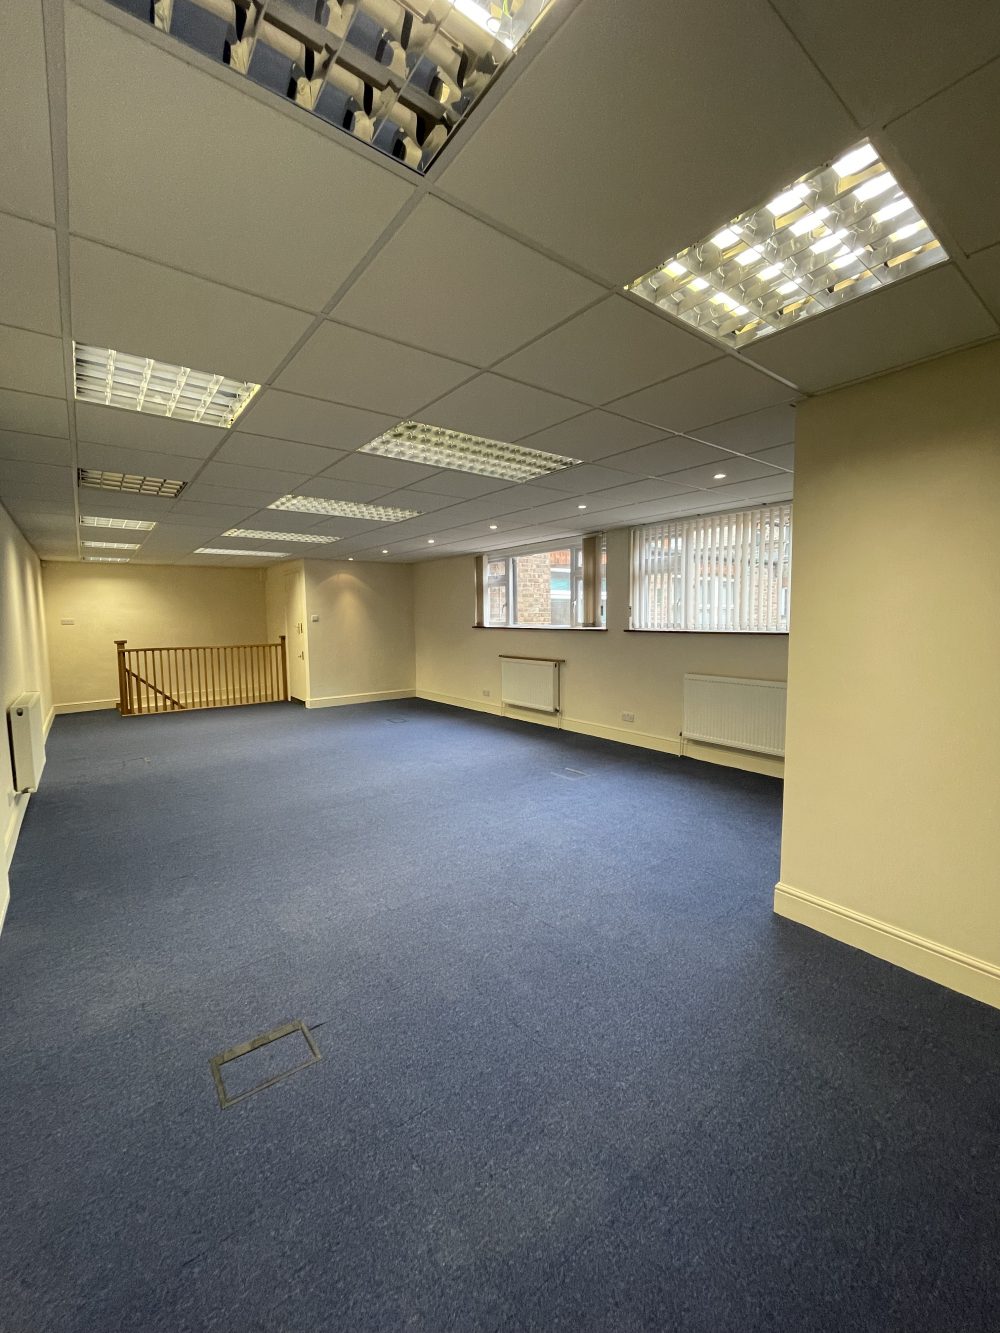 N12 Finchley High Road – Live work unit to rent with parking 30